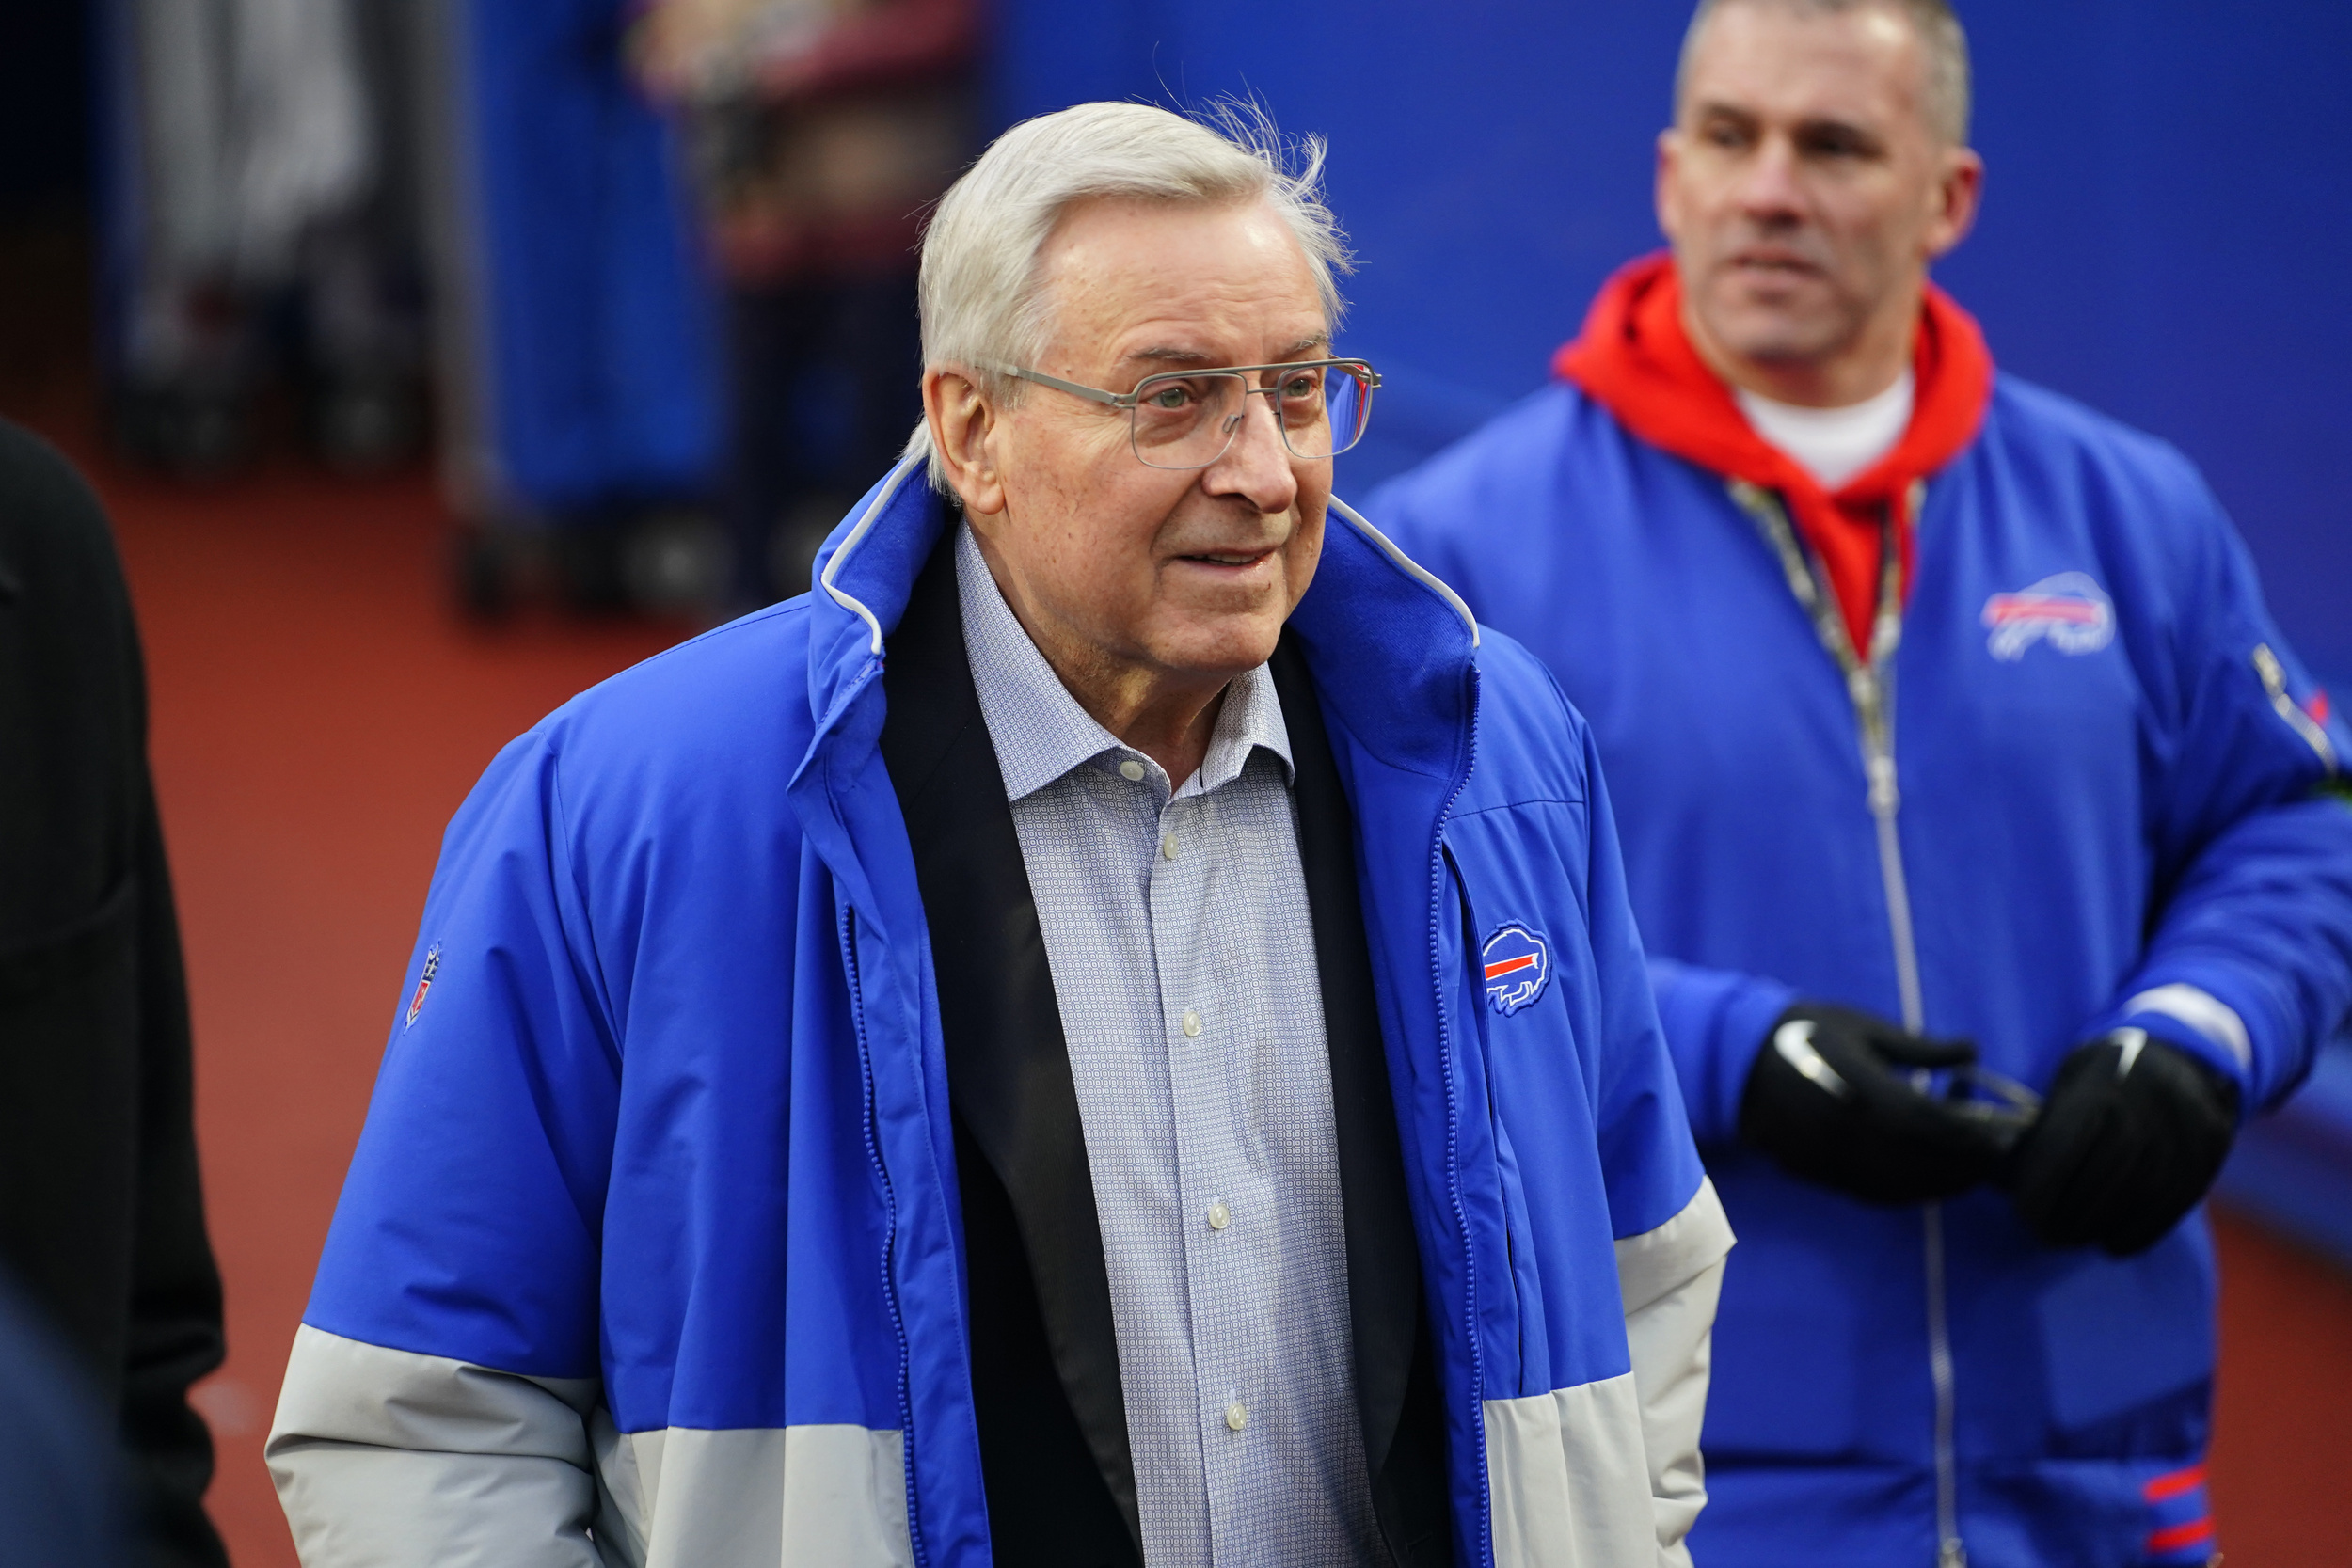 bills owner puts share of team up for sale weeks after raising ticket prices